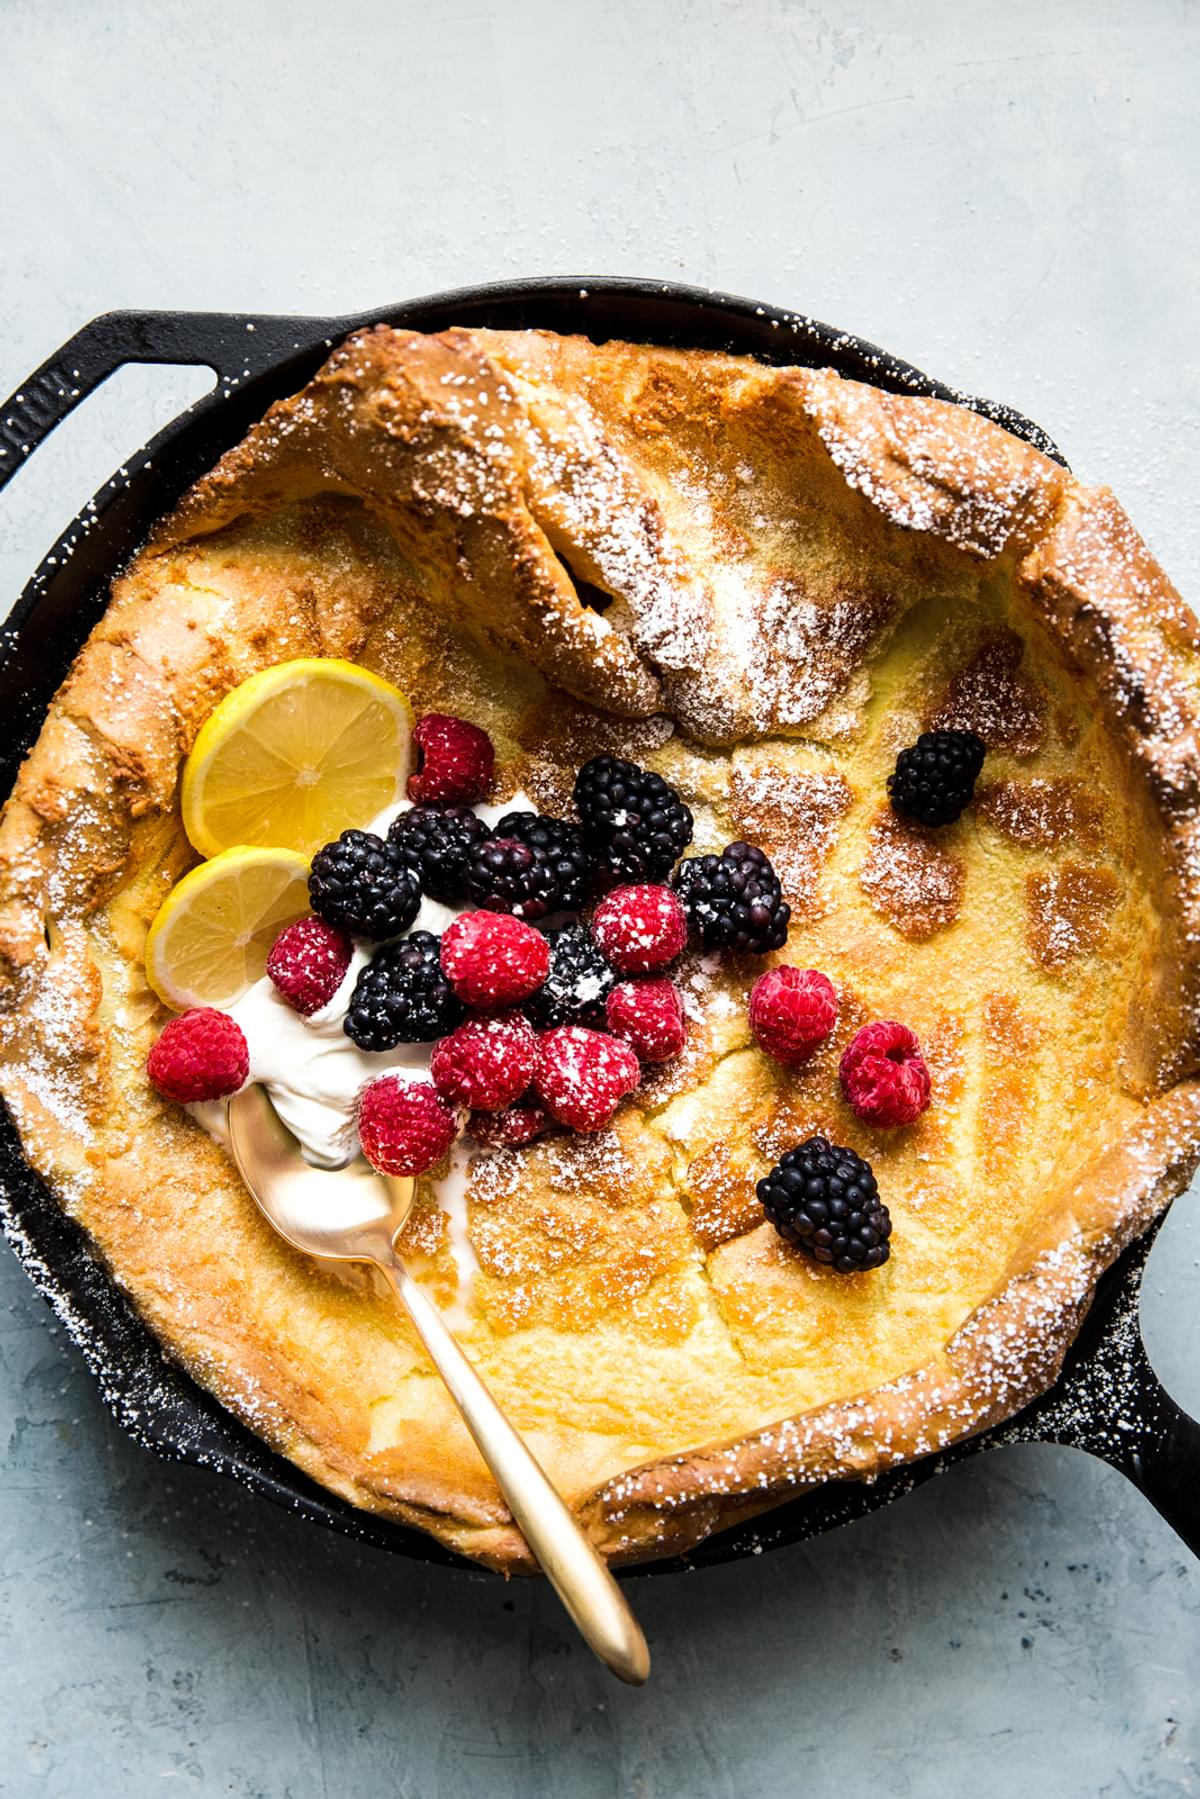 Homemade Dutch baby pancake in a cast iron skillet topped with whipped cream, powdered sugar, berries and lemon